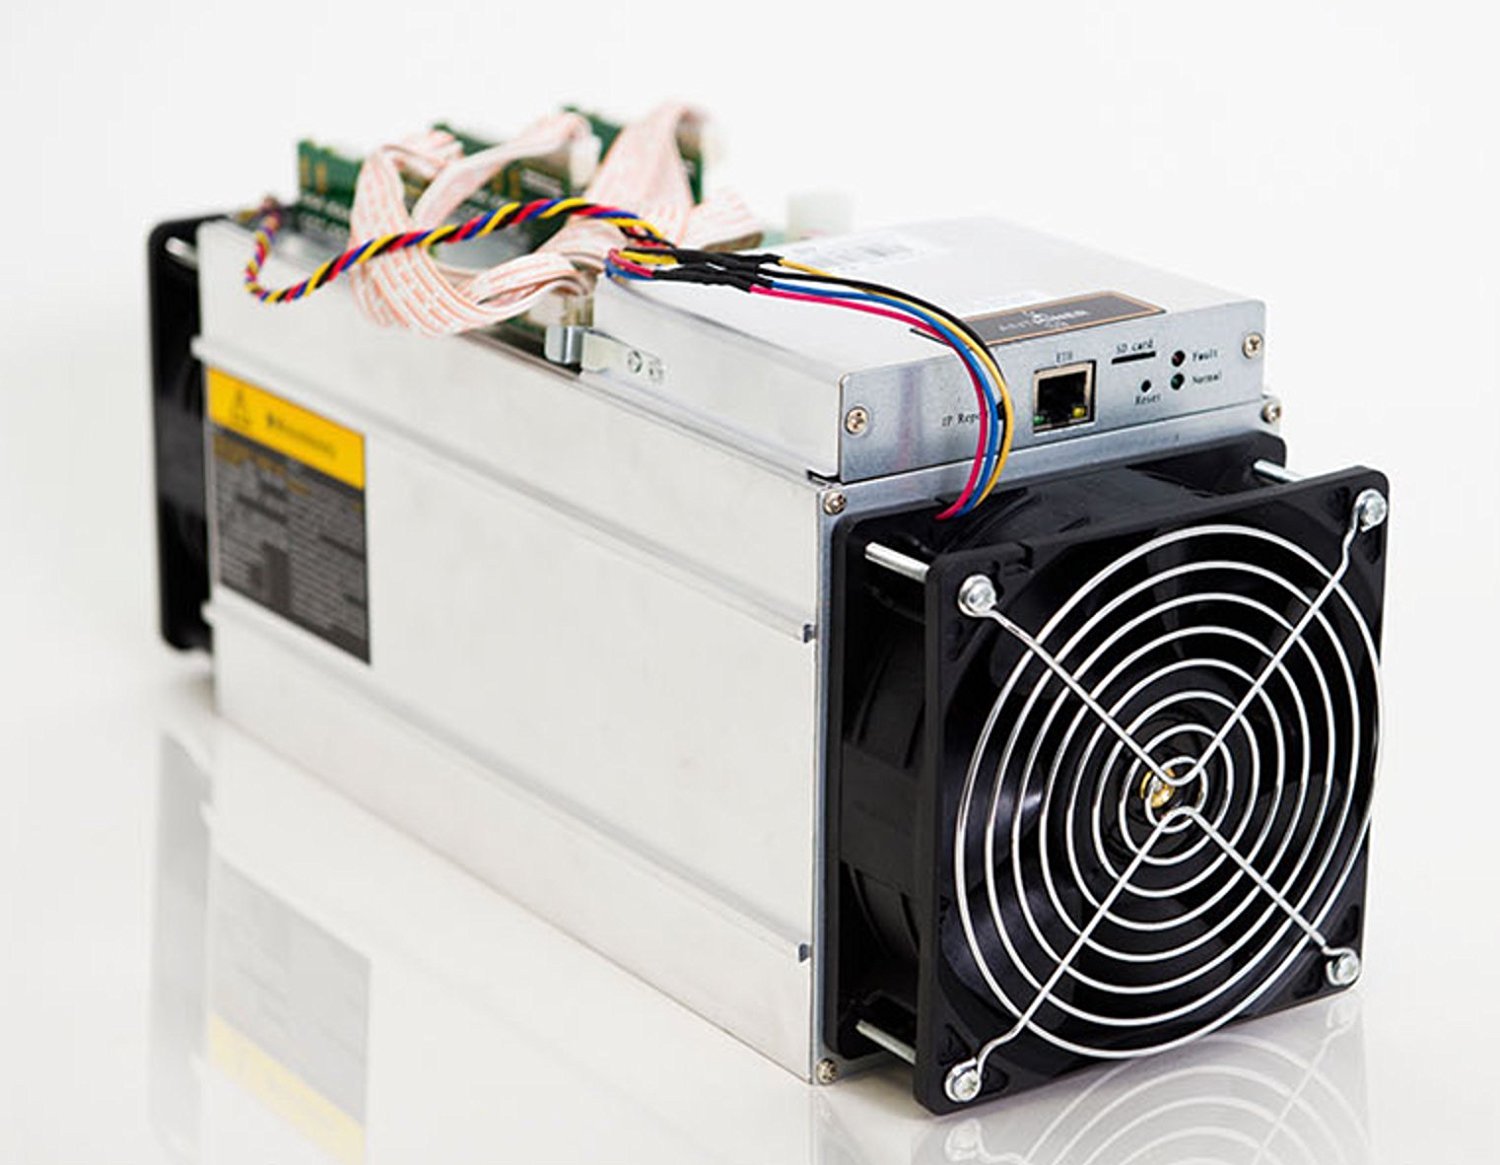 Gem Unit - Antminer S9 16th W/ ASIC Boost Bitcoin Miner 30%